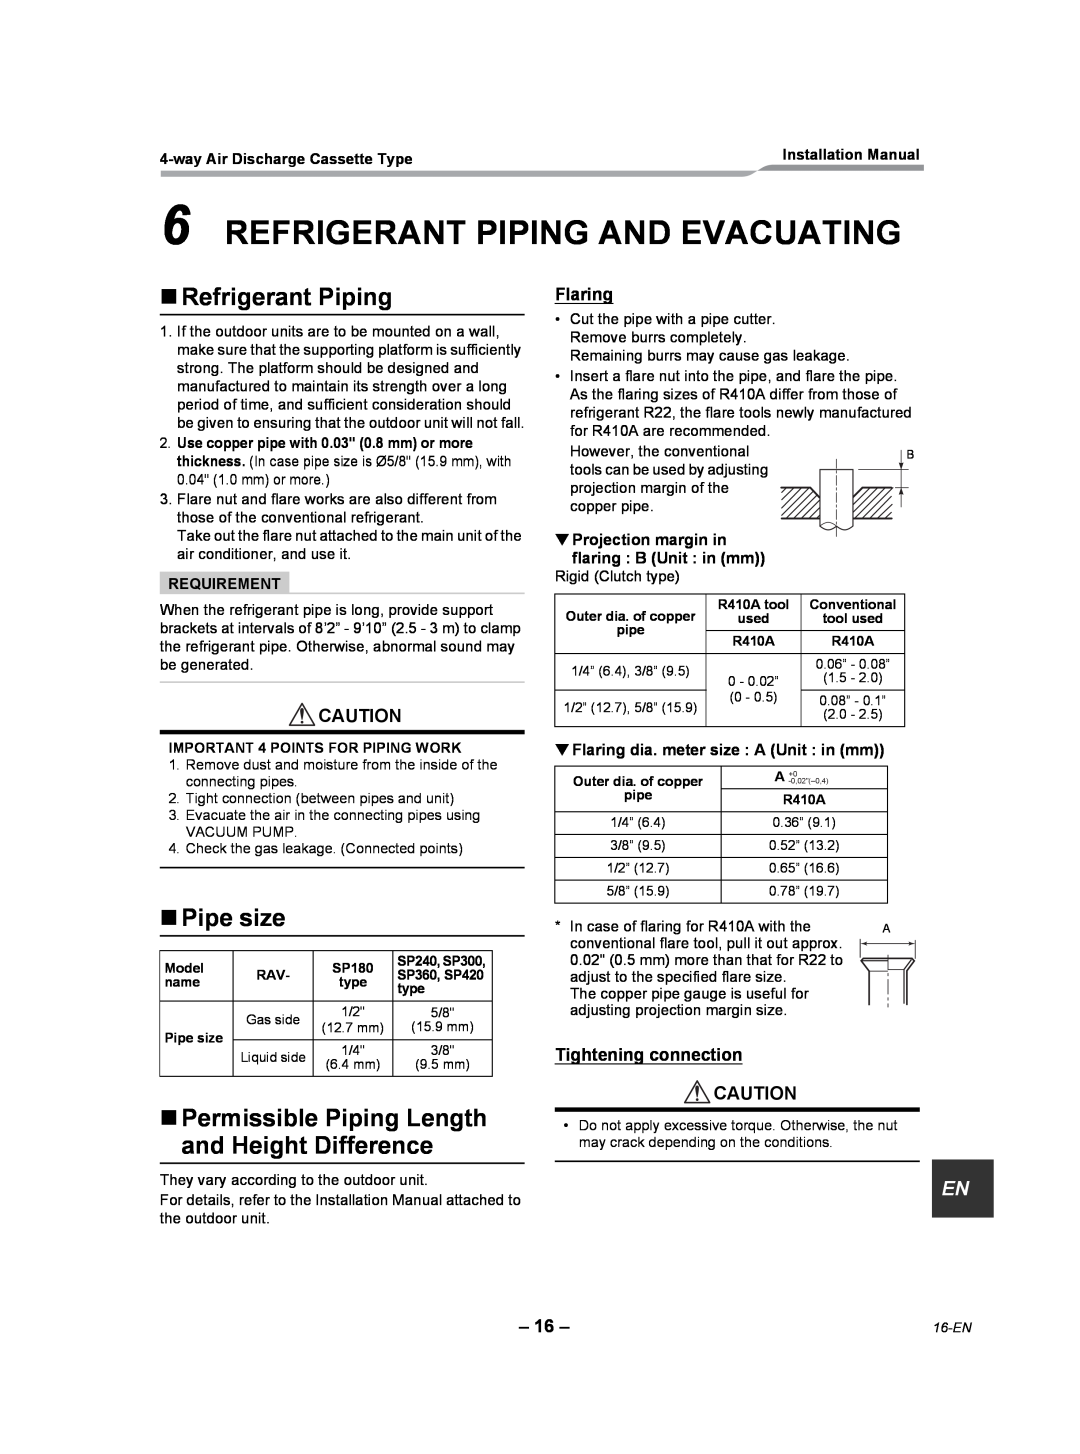 Toshiba RAV-SP180UT-UL Refrigerant Piping And Evacuating, „Refrigerant Piping, „Pipe size, Flaring, Tightening connection 